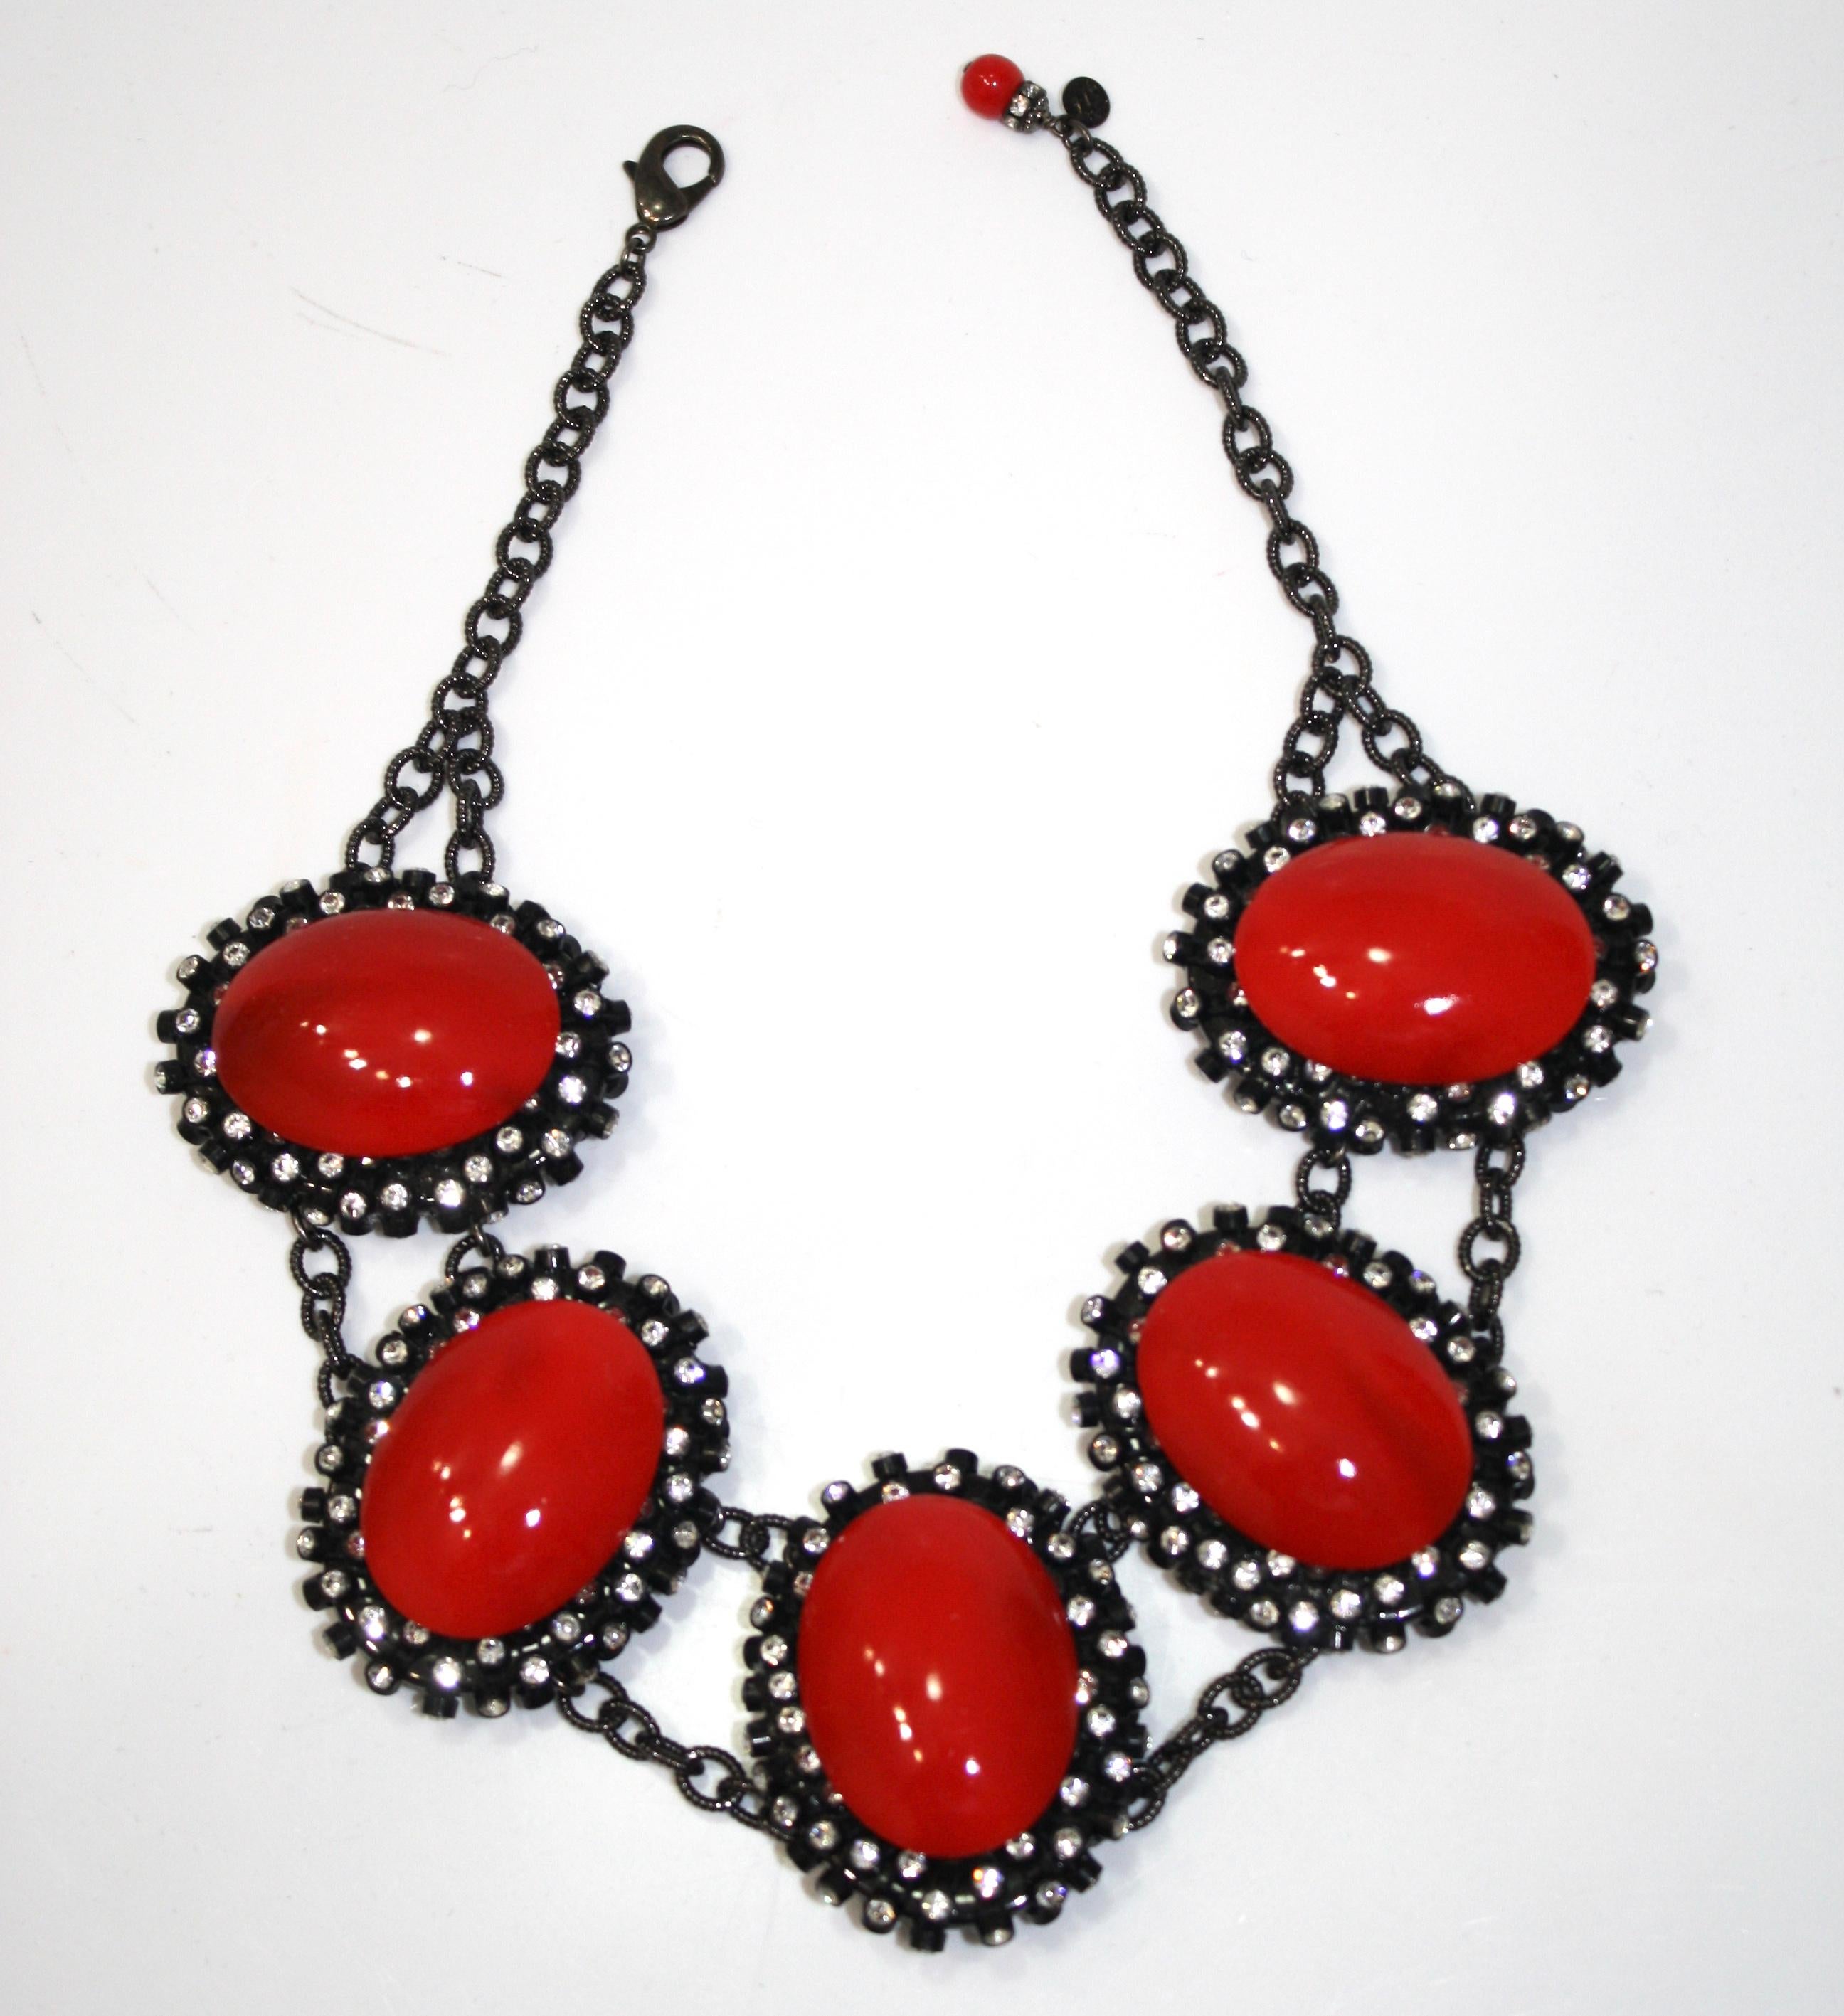 Women's or Men's Francoise Montague Red Agate, Swarovski Crystal, and Black Rhodium Necklace